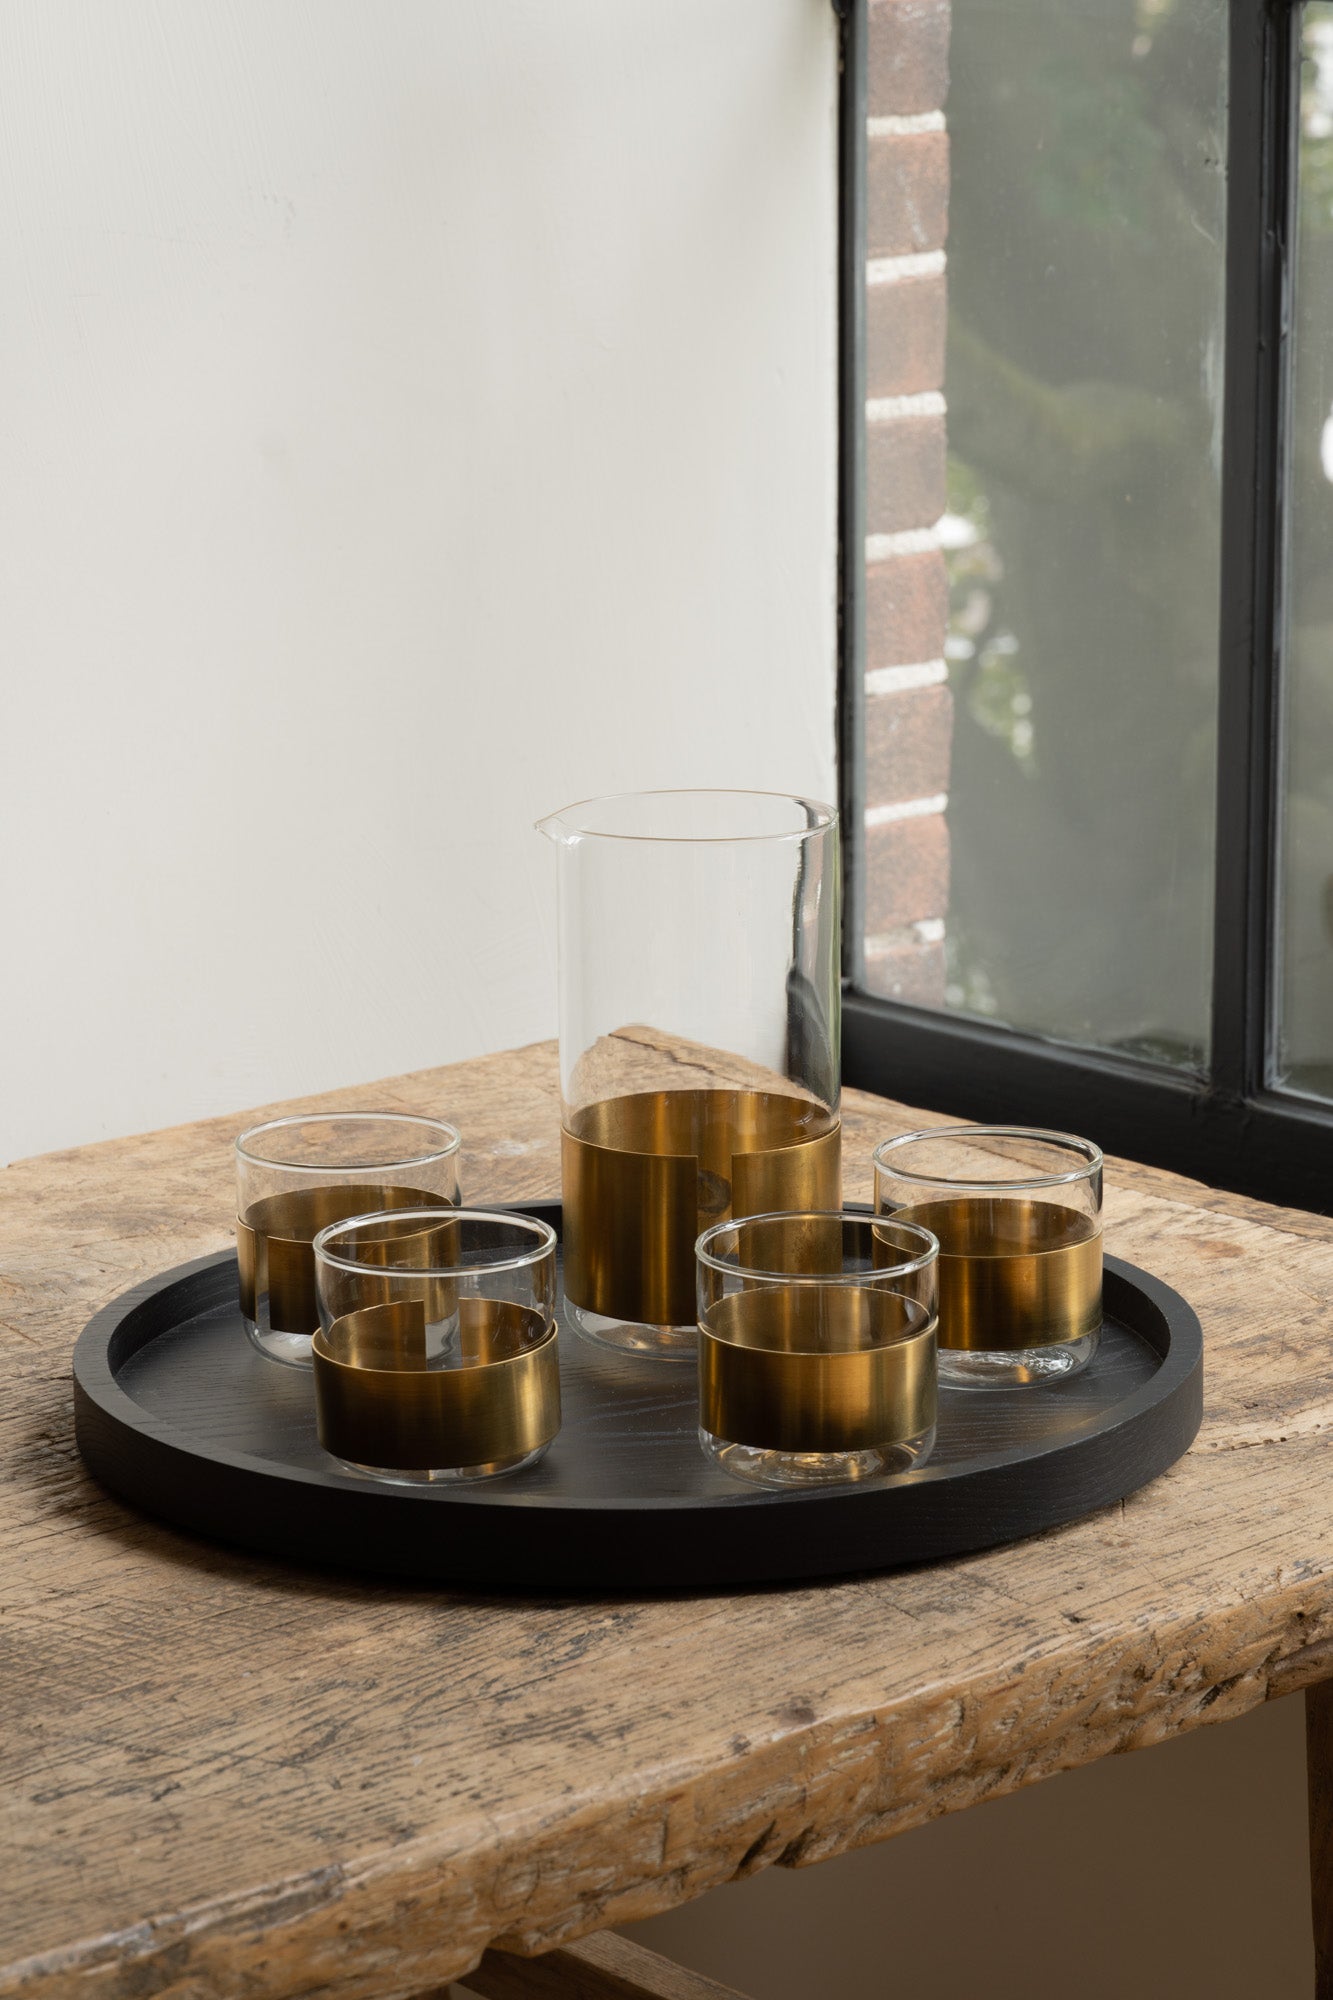 Copper Alchemy Chemistry Glass with matching carafe by Serax set on black wooden serving tray.